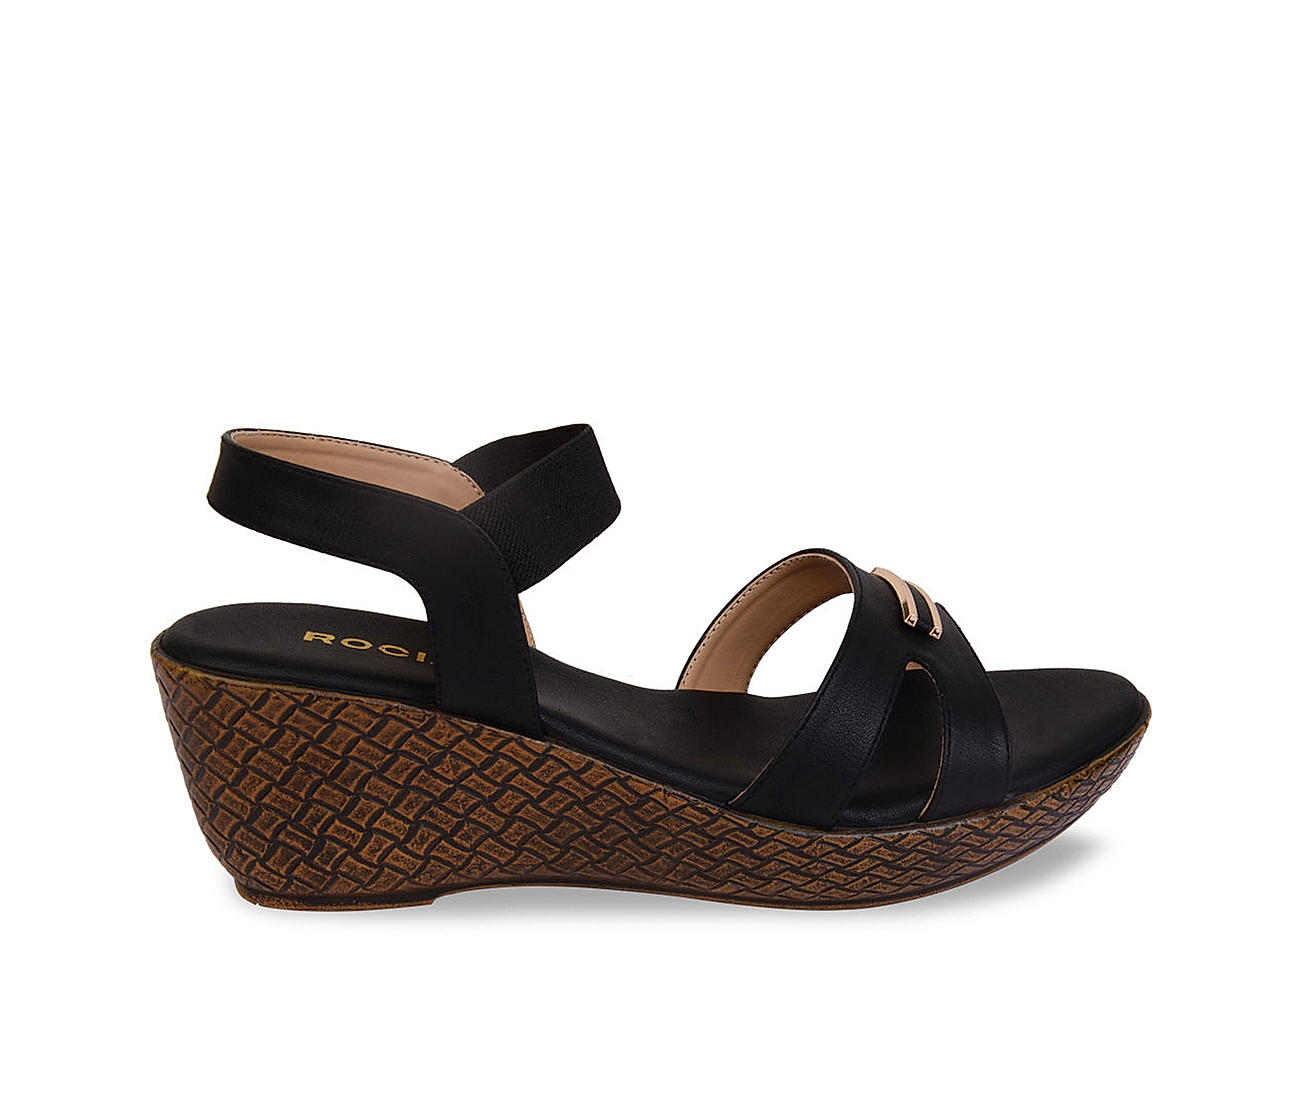 Buy Wedges Heels for Women Online in India at Regal Shoes